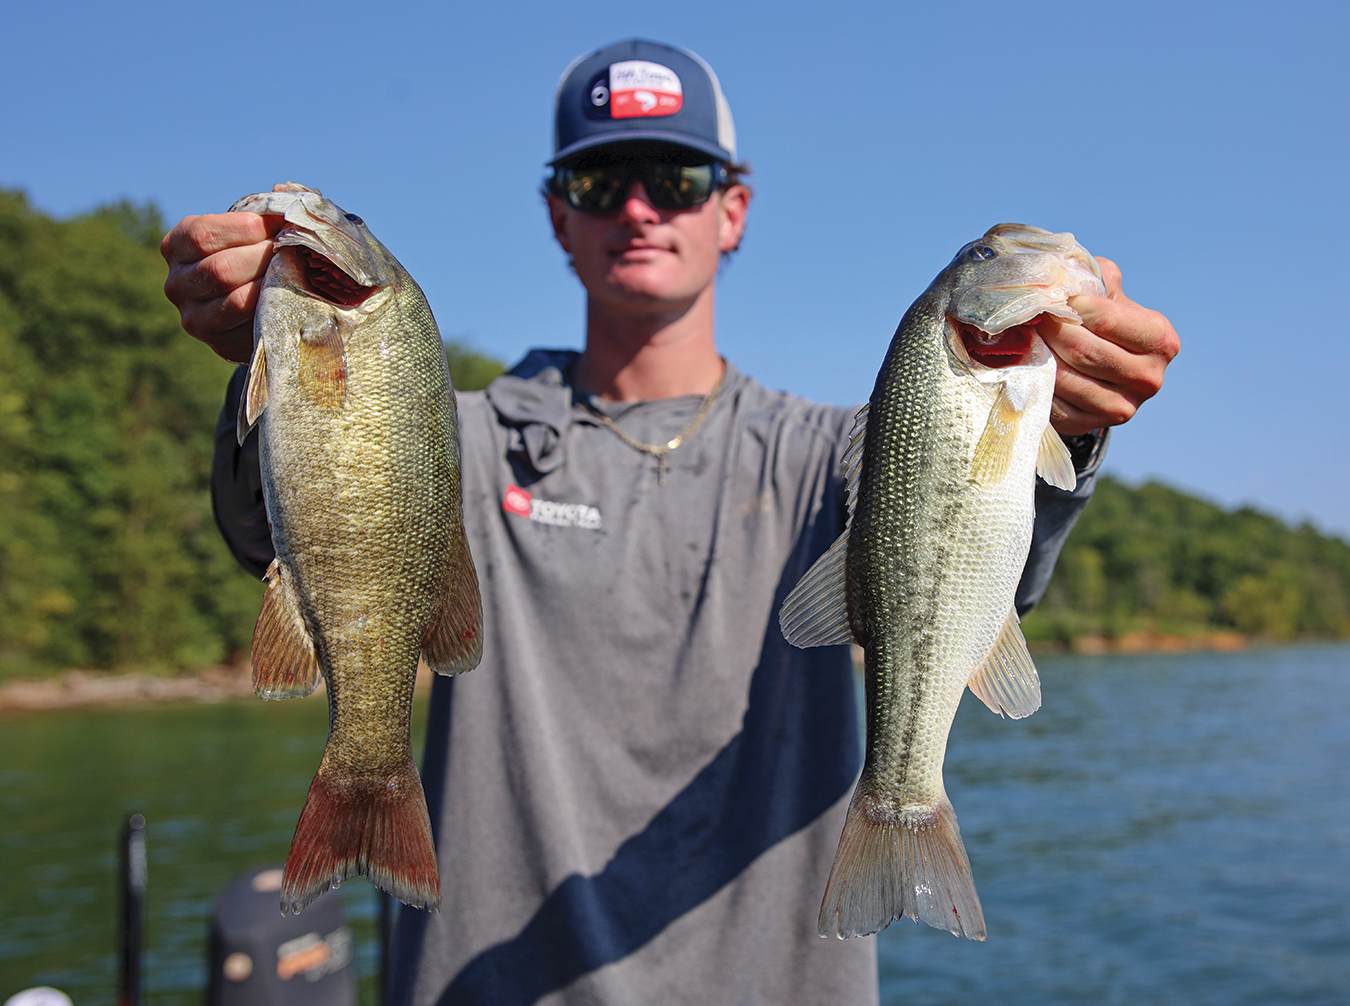 WESLEY STRADER: Countdown to the 2020 Bass Pro Tour Opener 3, 2, 1 -  Major League Fishing